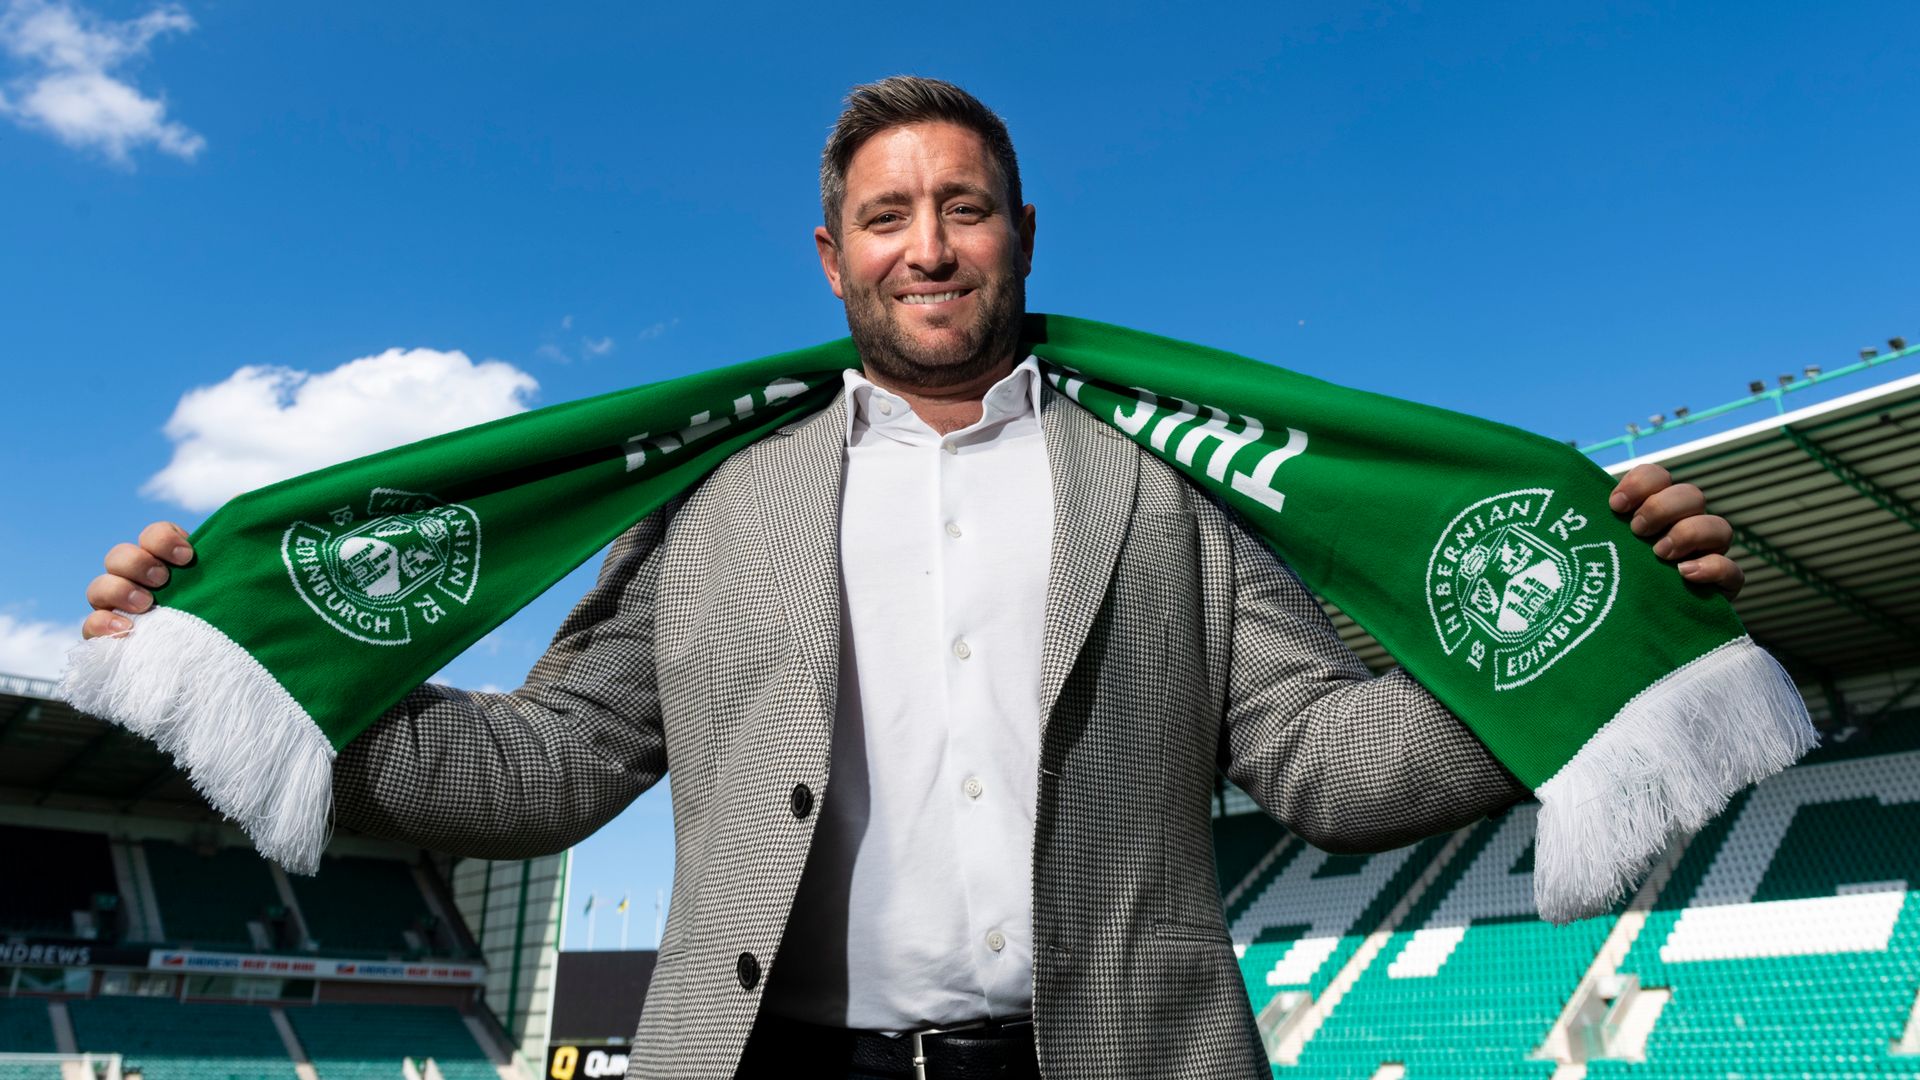 Hibs to face SPFL newcomers | Full Scottish League cup draw